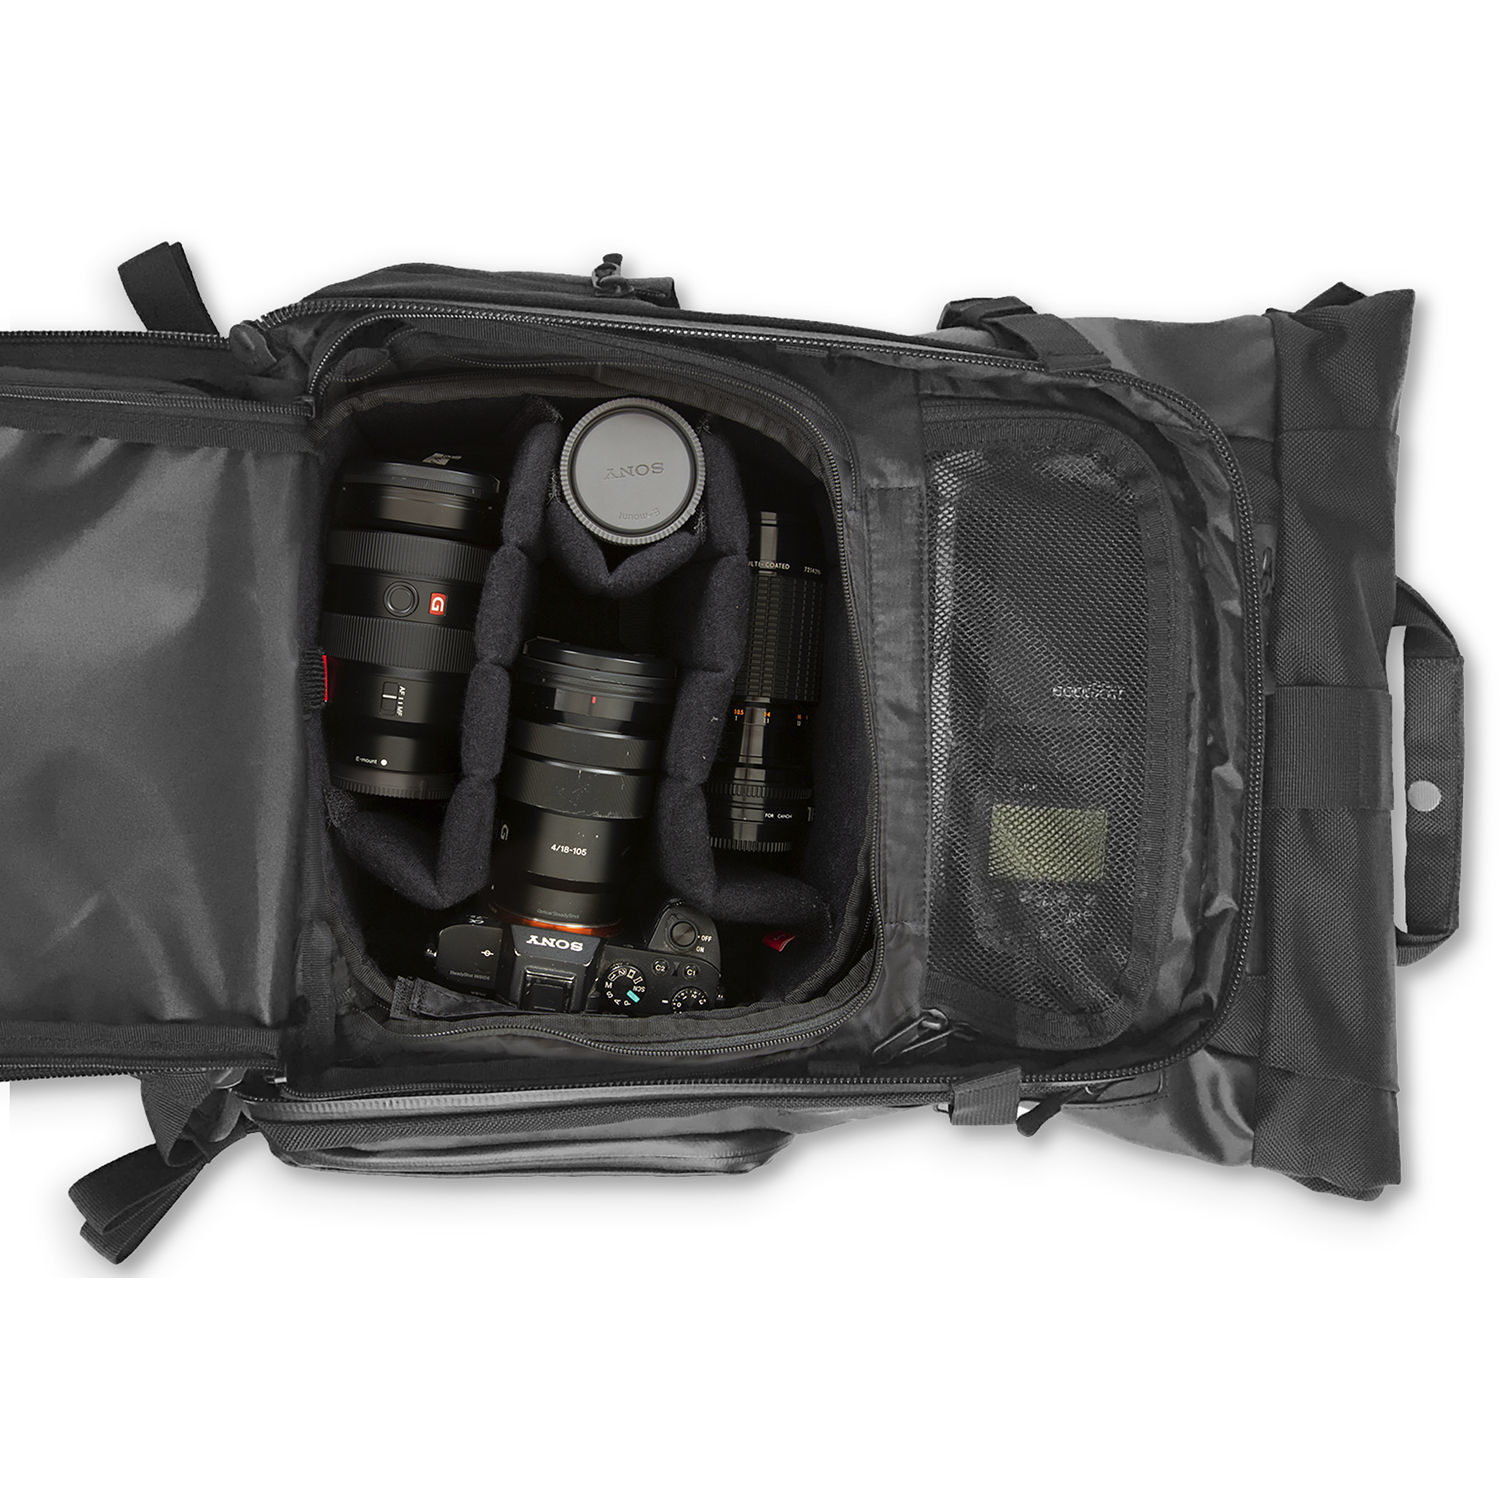 the best camera bag bang for buck - part 1